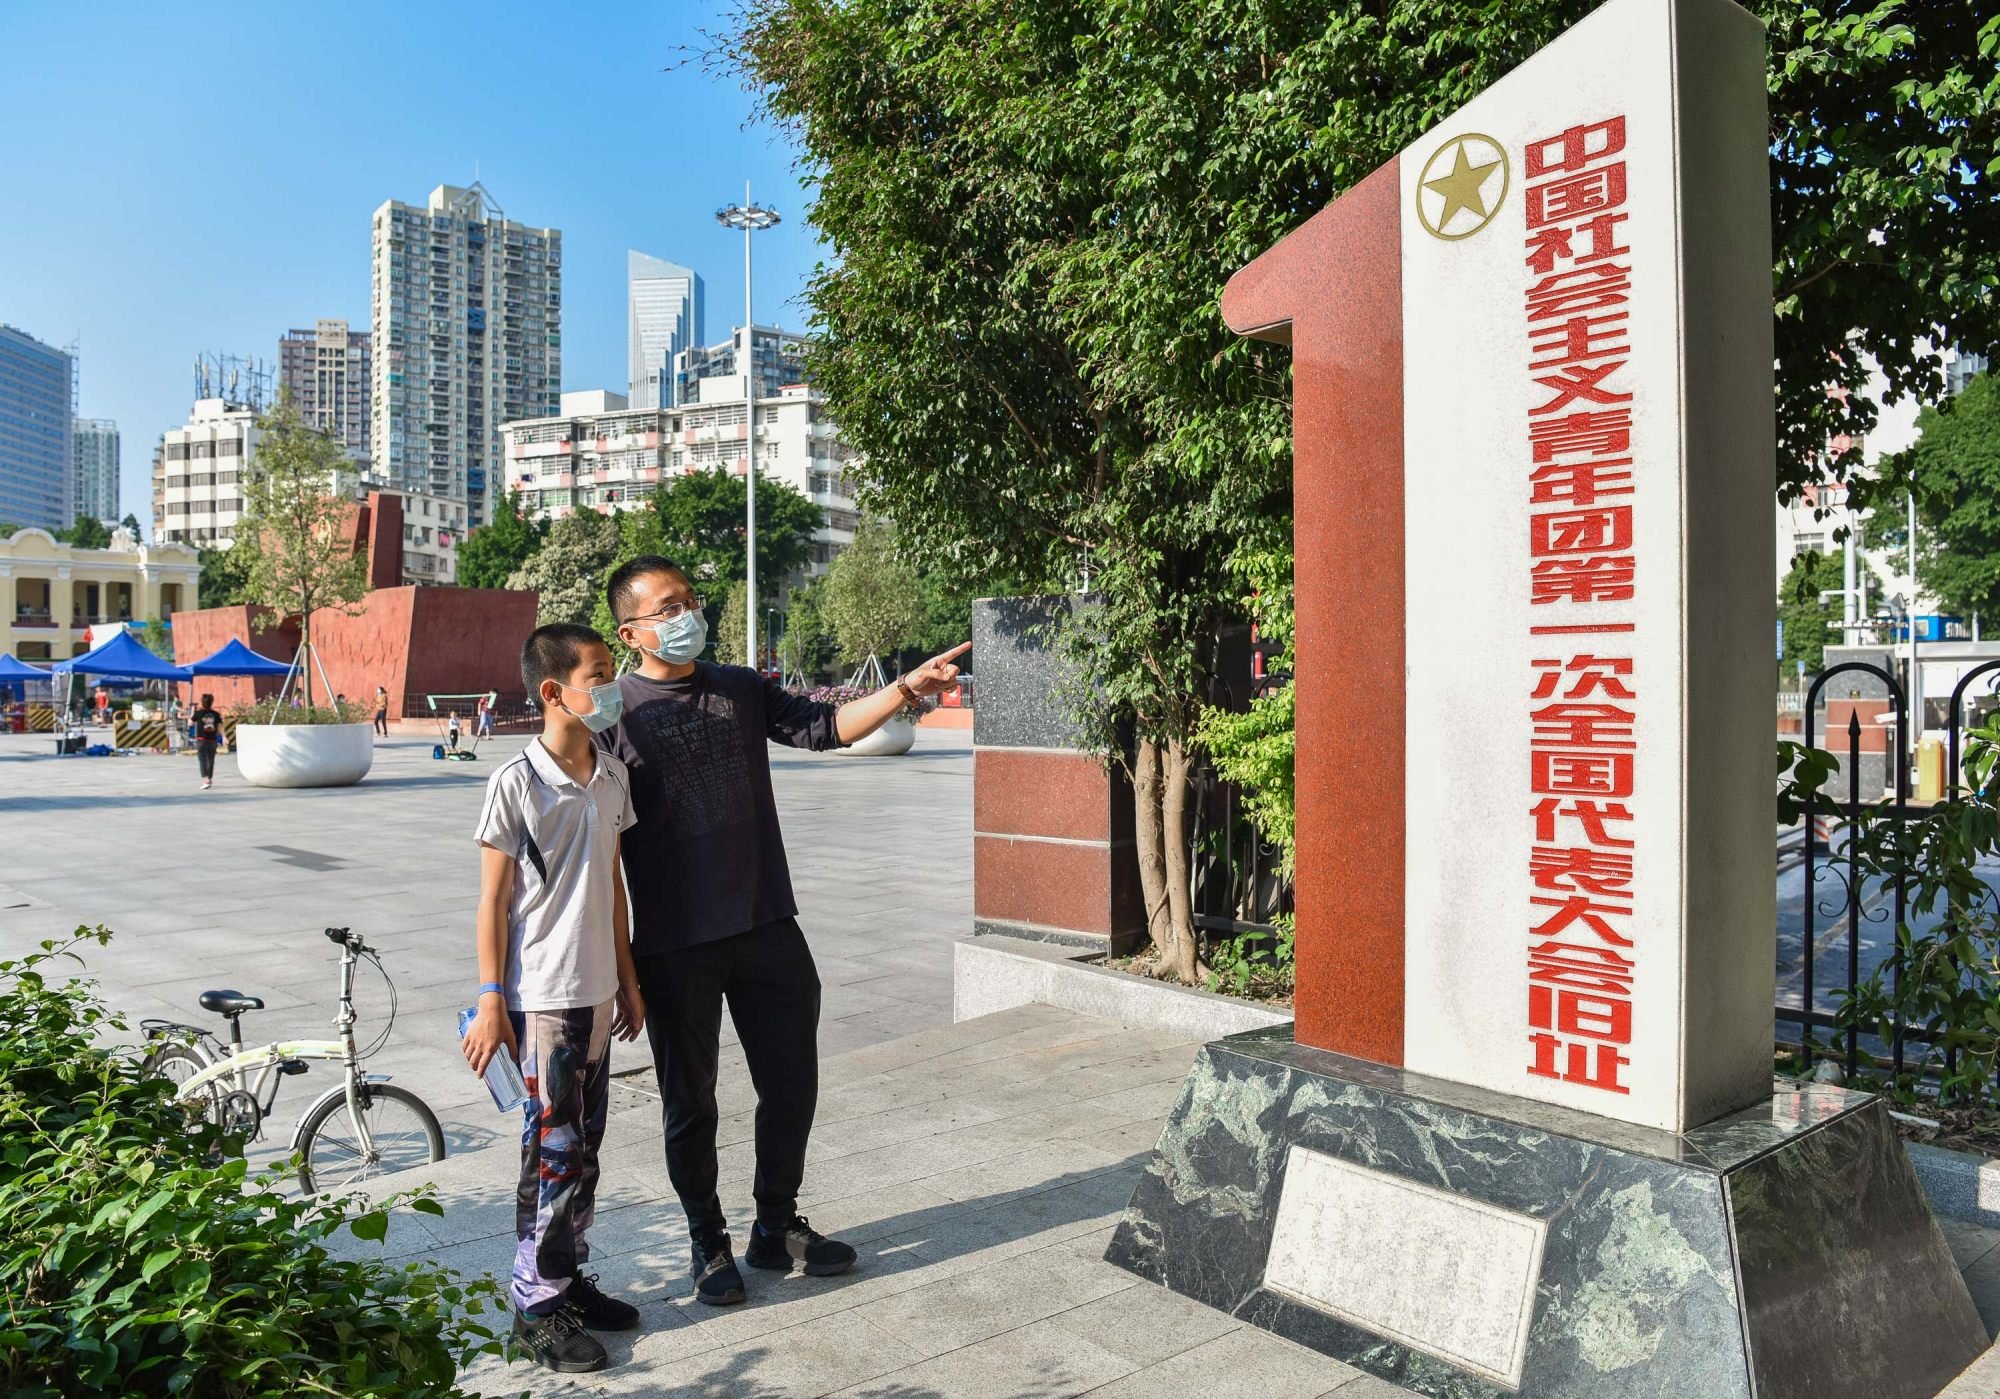 A monument at Tuanyida Square in Guangzhou, southern China, marks the Communist Youth League’s first national congress 100 years ago. Photo: Xinhua